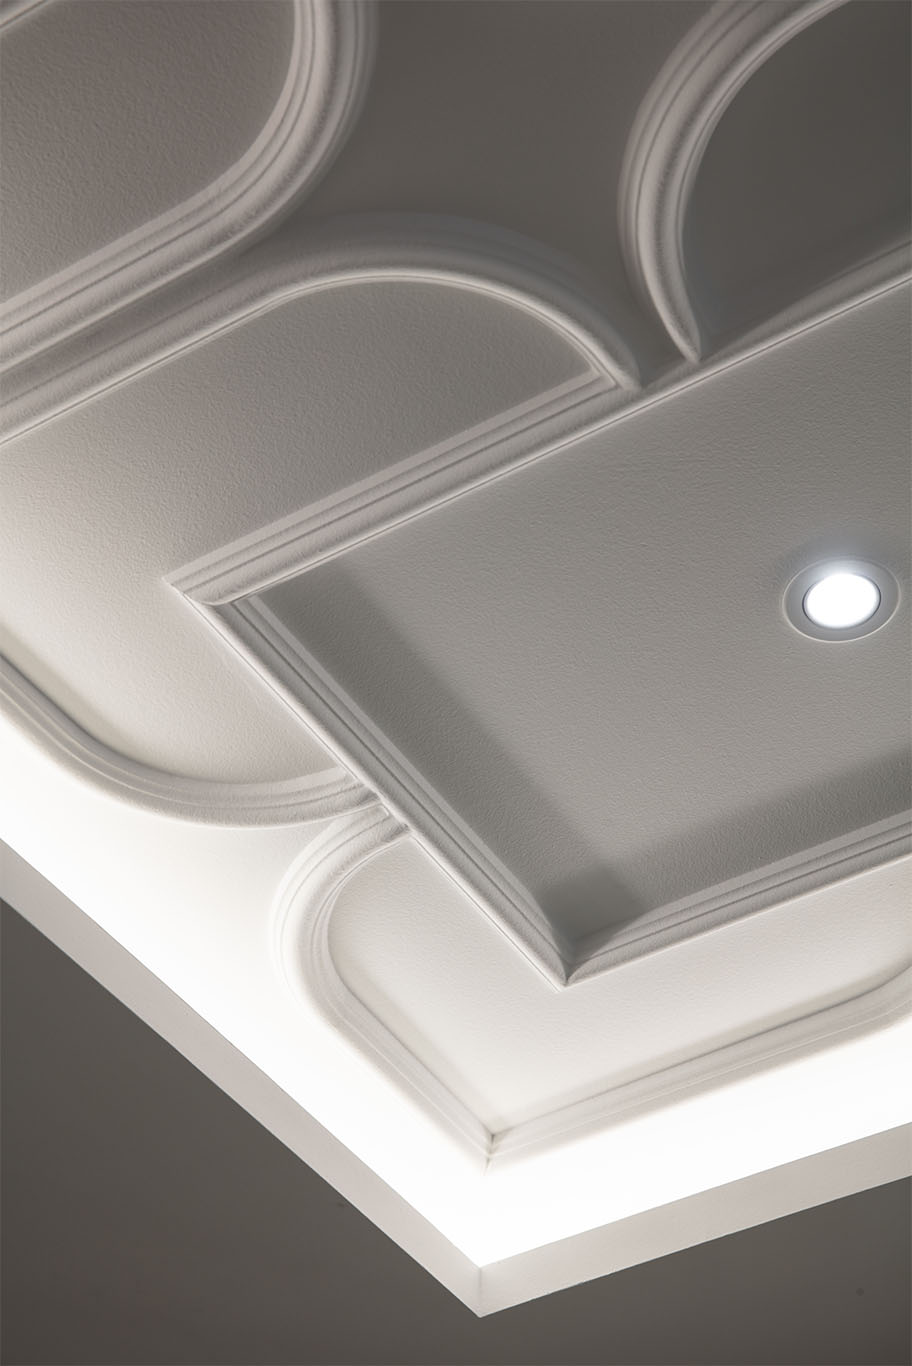 MIEUX The White Royale modern ceiling design with hidden light Mieux interior deisgn